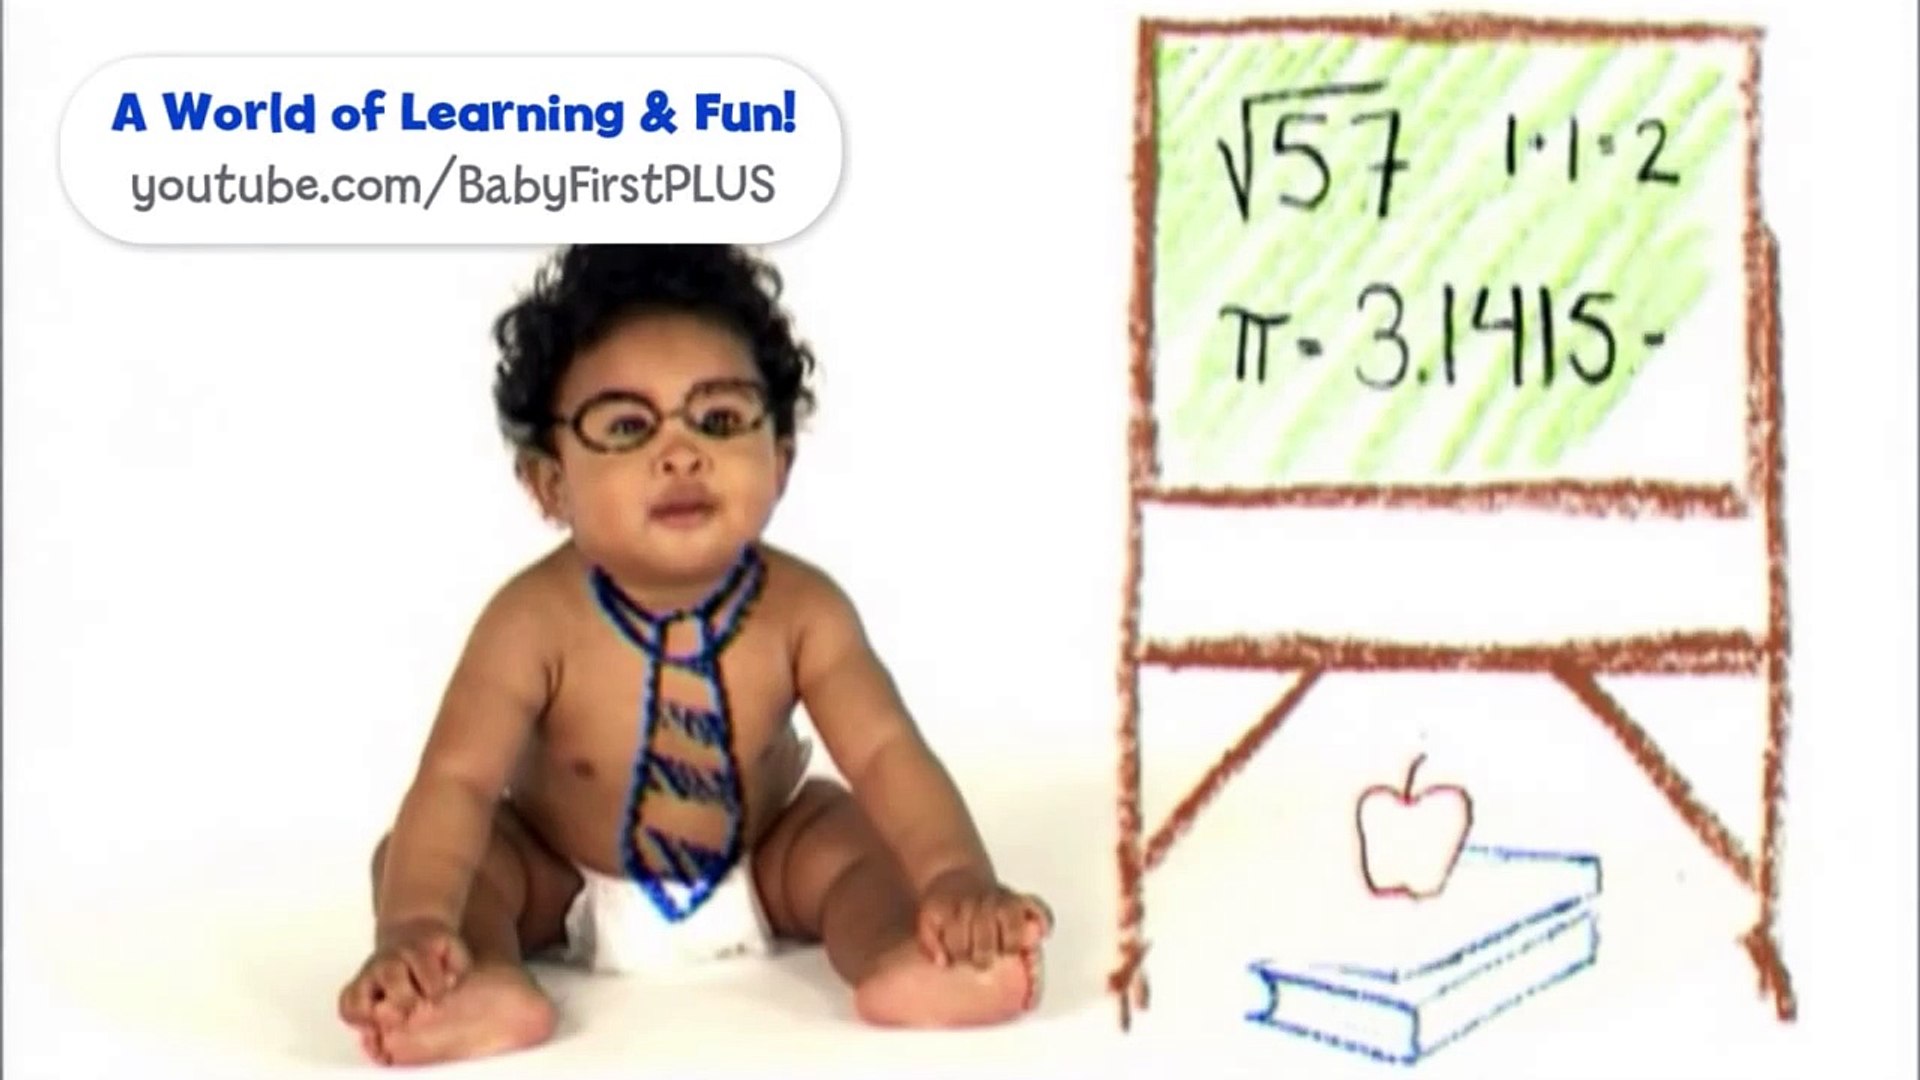 BabyFirstPlus is an amazing educational resource for babies and their parents! We have a variety of 